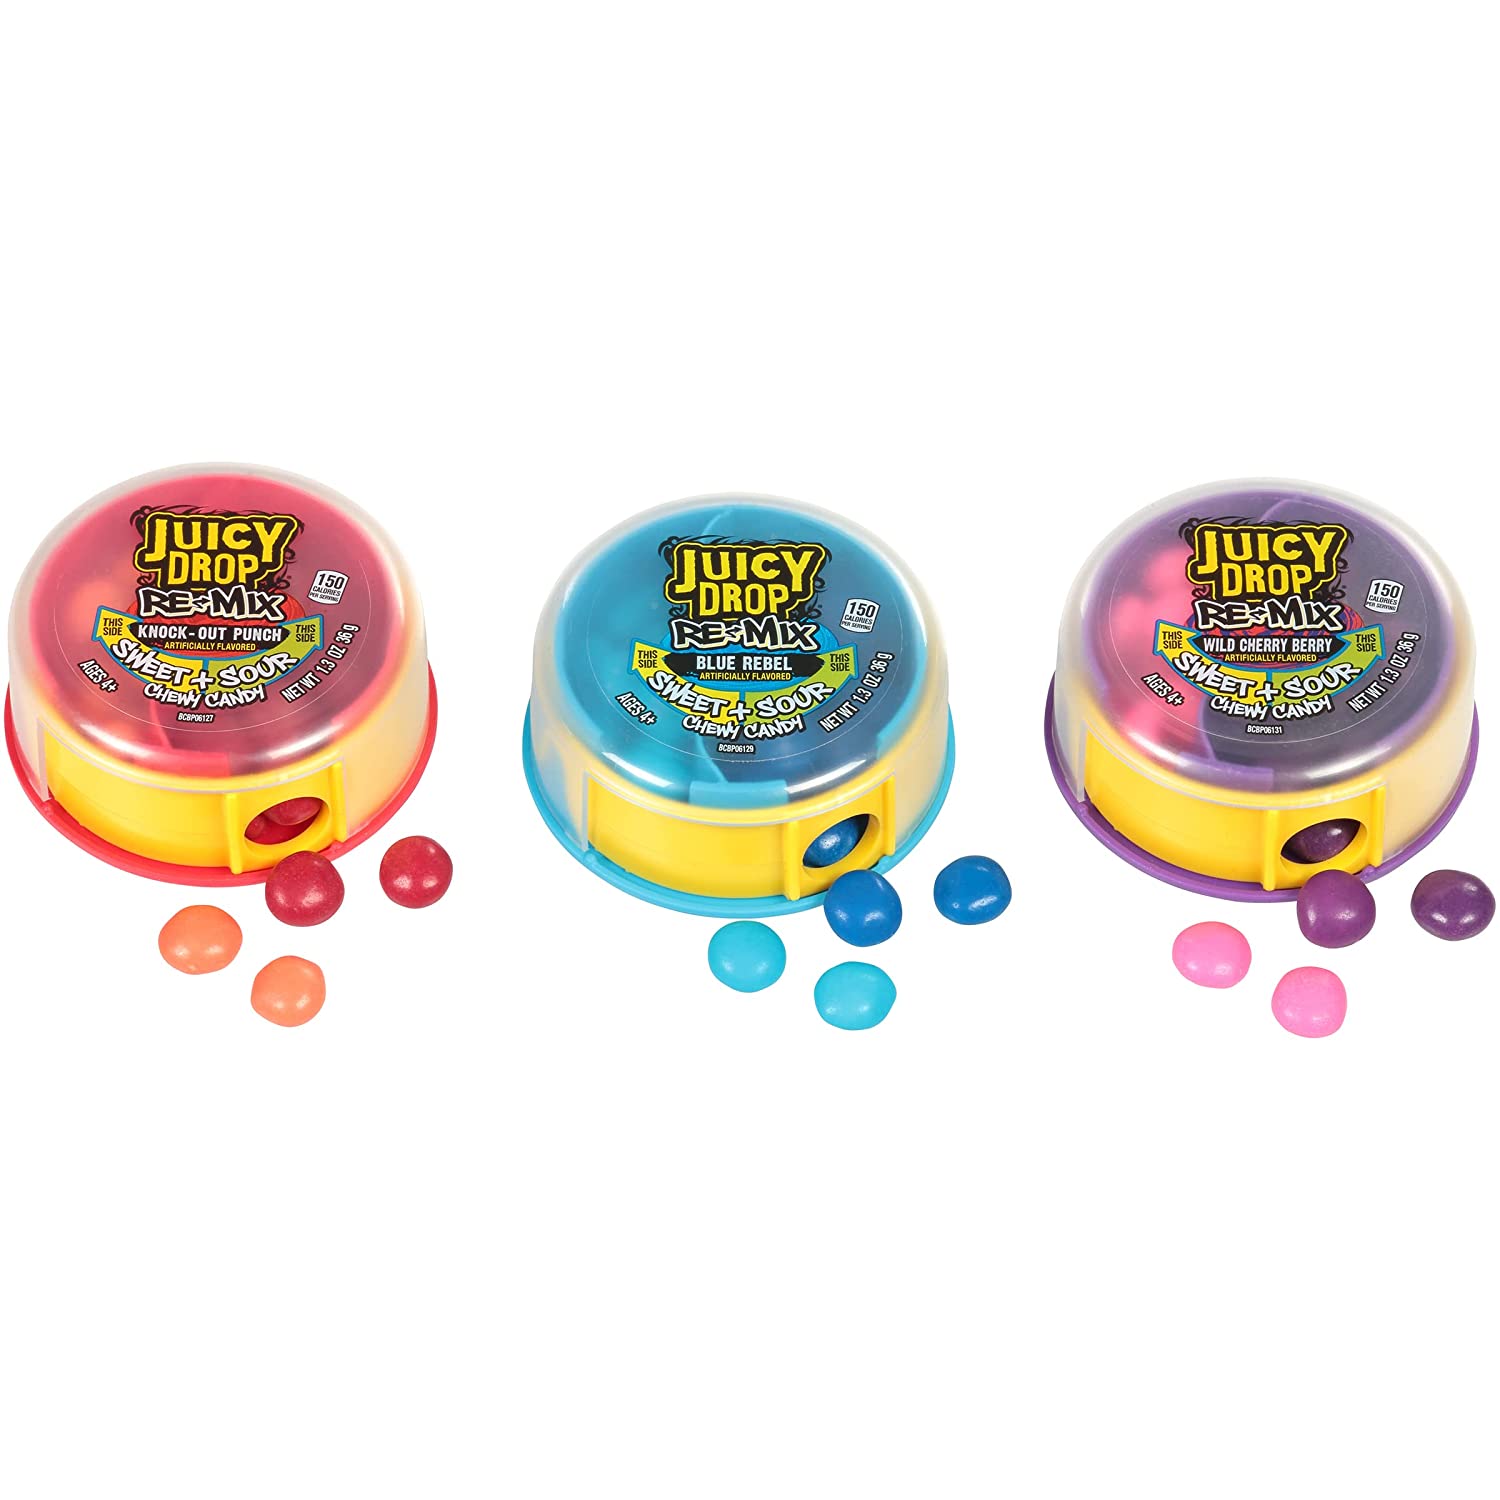 Juicy Drop Re-Mix Sweet & Sour Chewy Candy 37g - Flavour chosen at Random